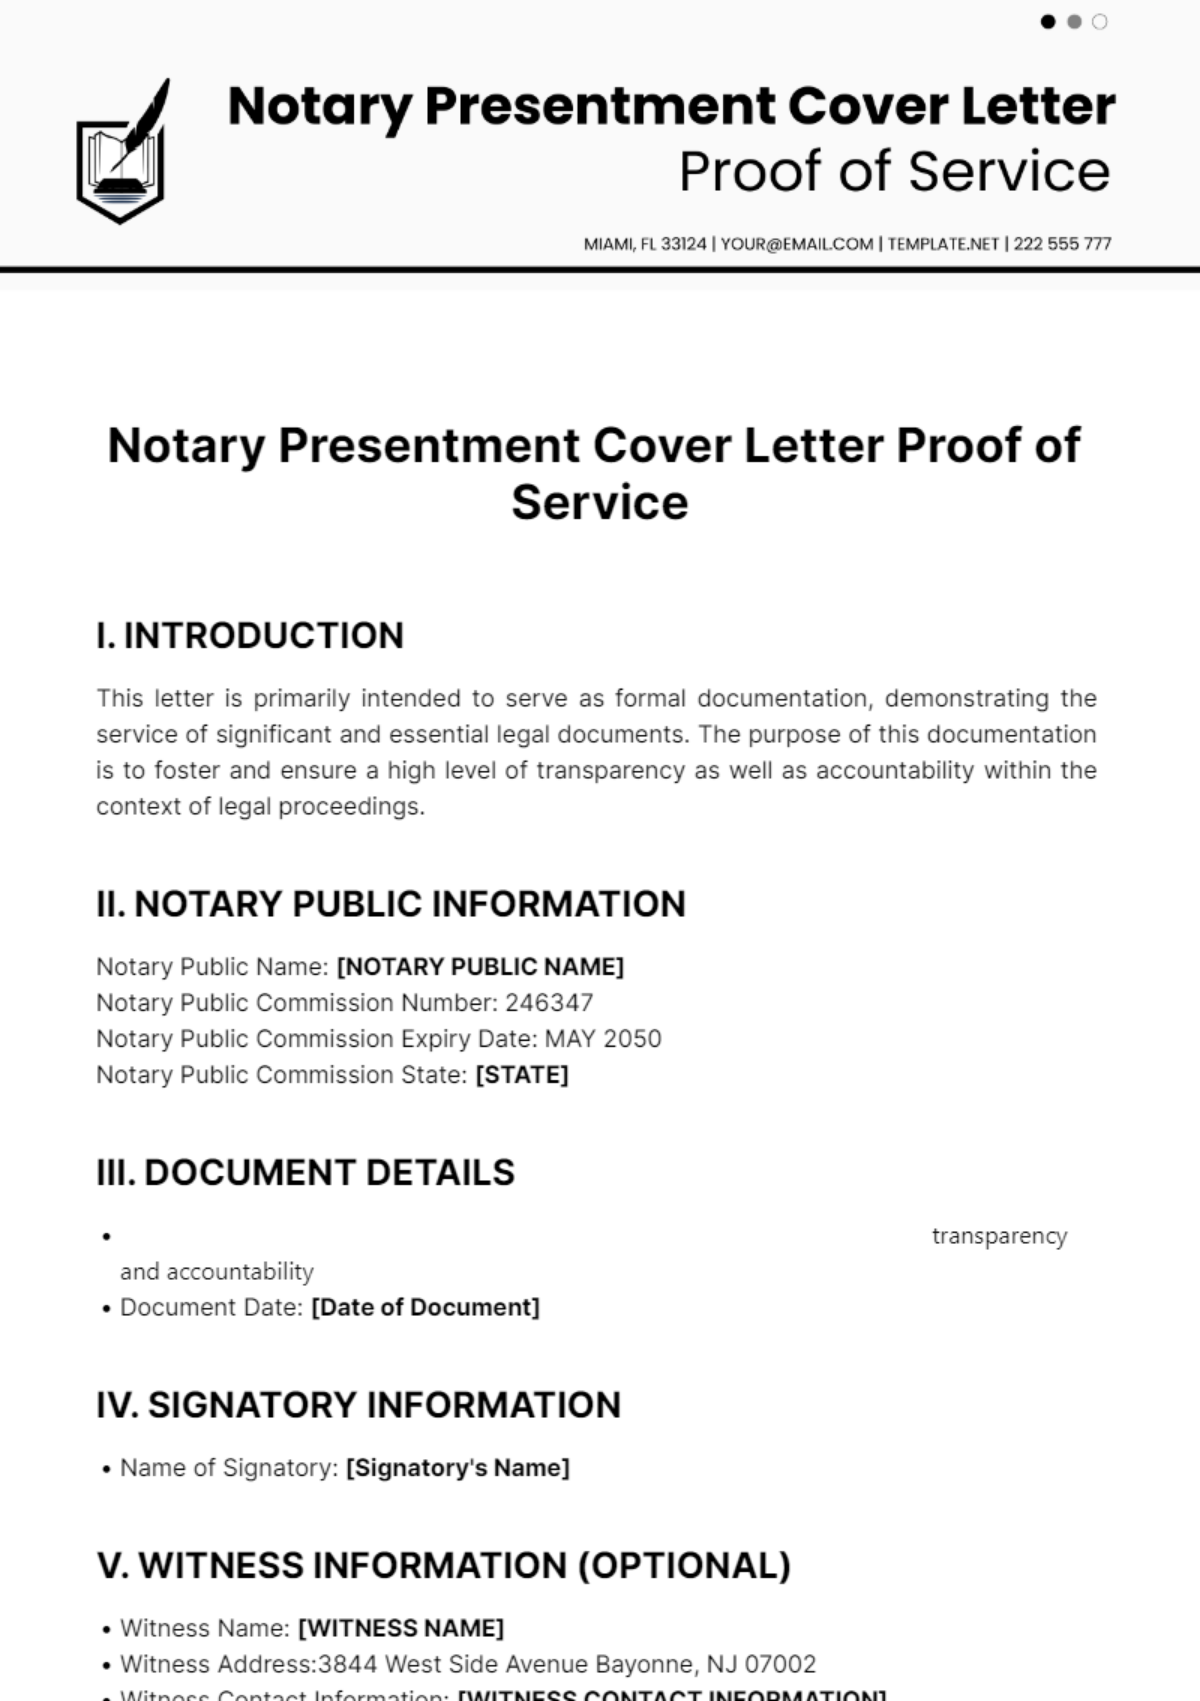 Free Notary Presentment Cover Letter Proof of Service Template